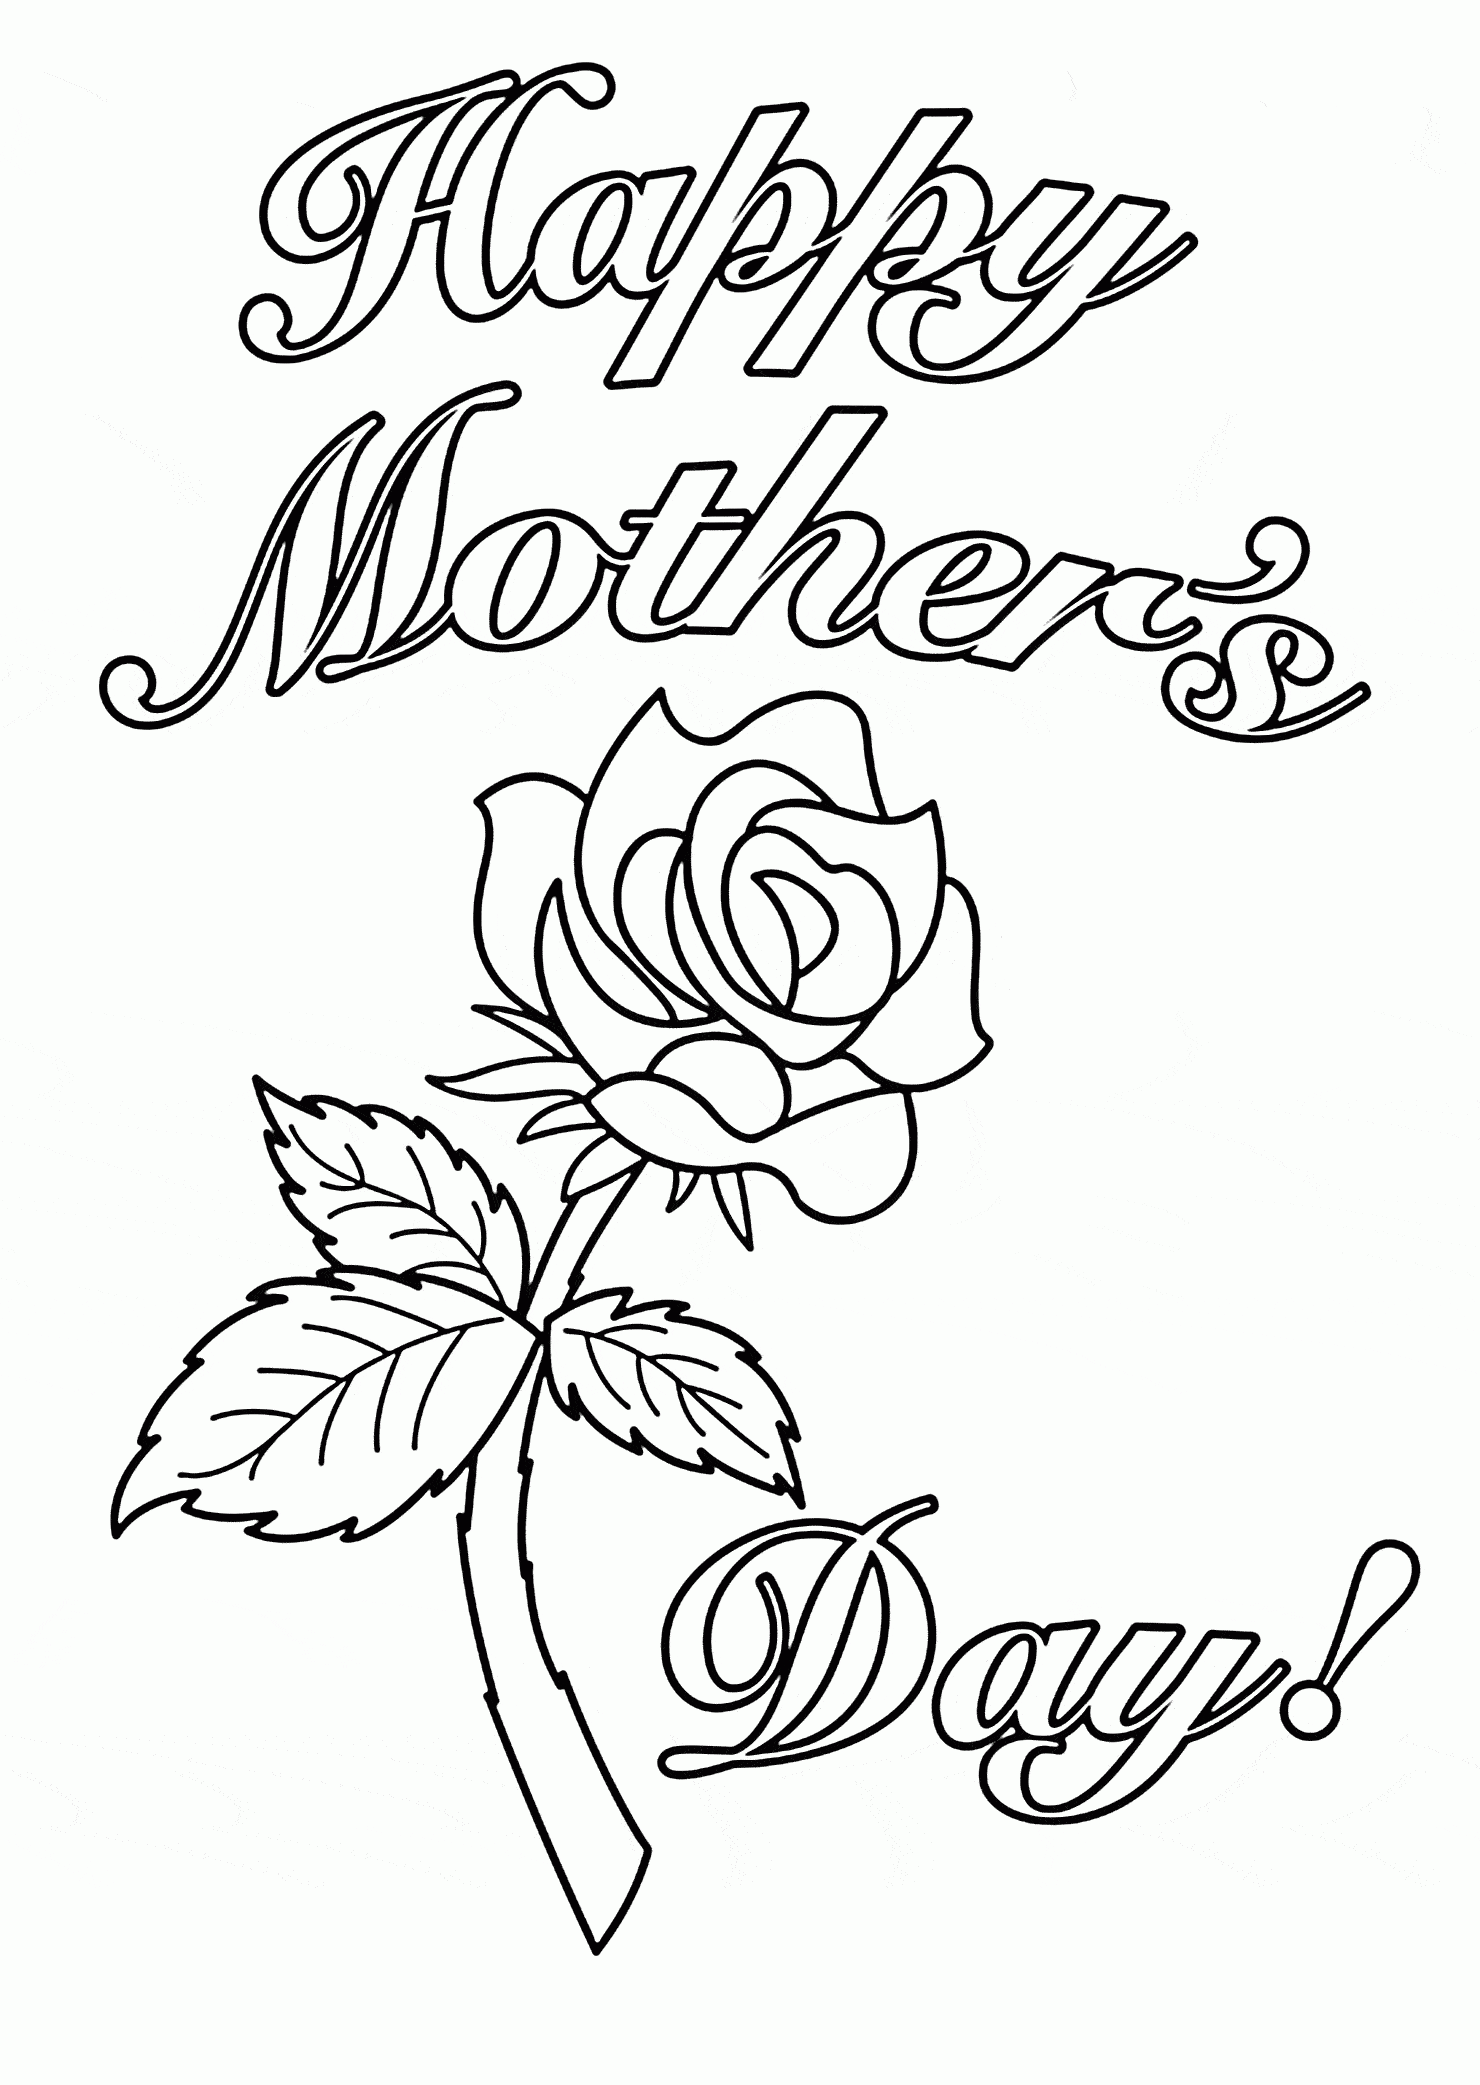 1480x2085 Easy Mothers Day Drawings Ideas, Pictures For Cards Mothers Day.